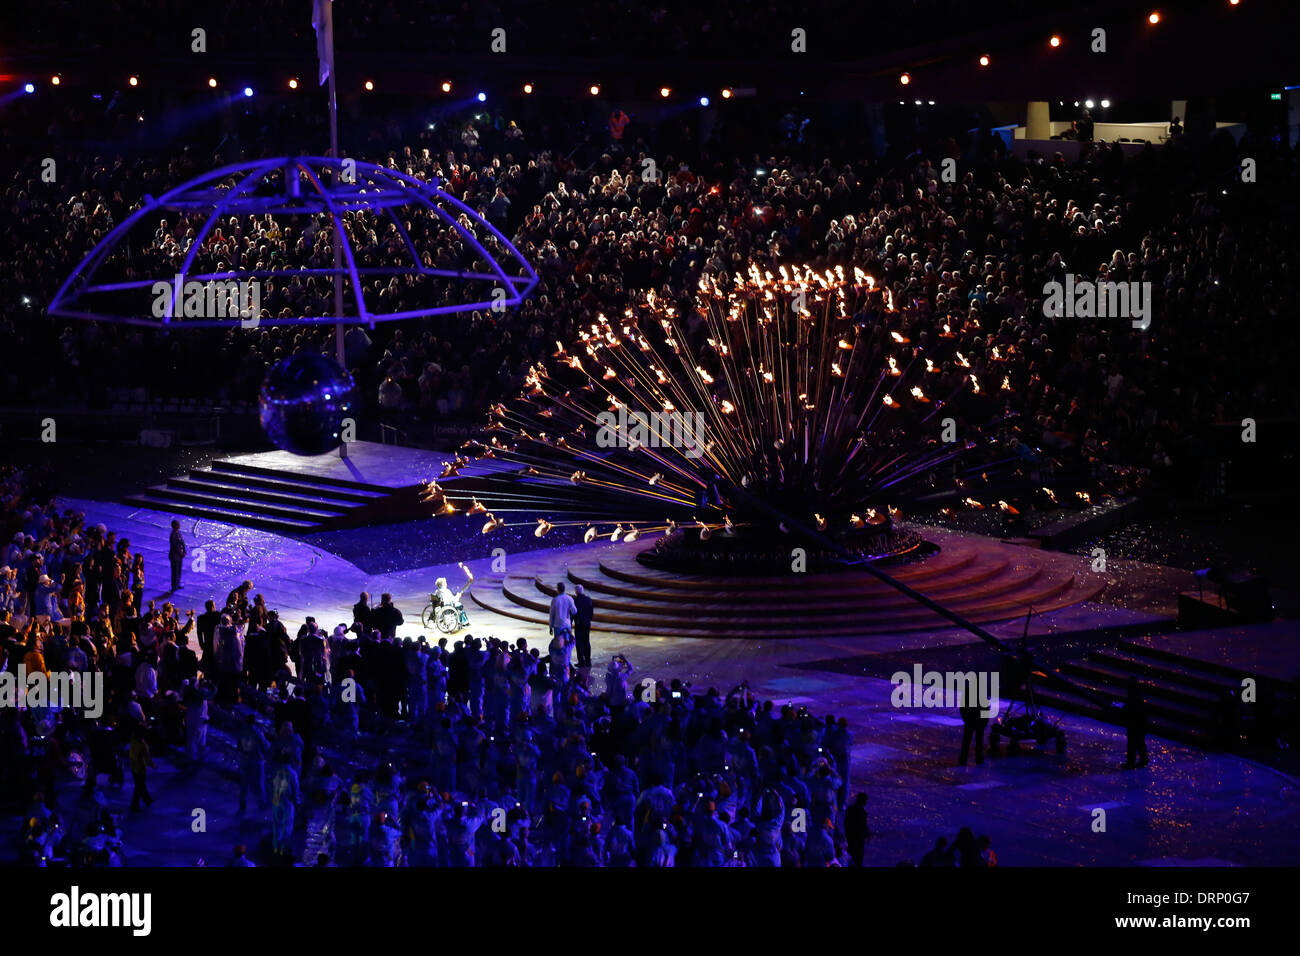 Performers in the Olympic Stadium during the opening ceremony of the London 2012 Paralympic Games Stock Photo